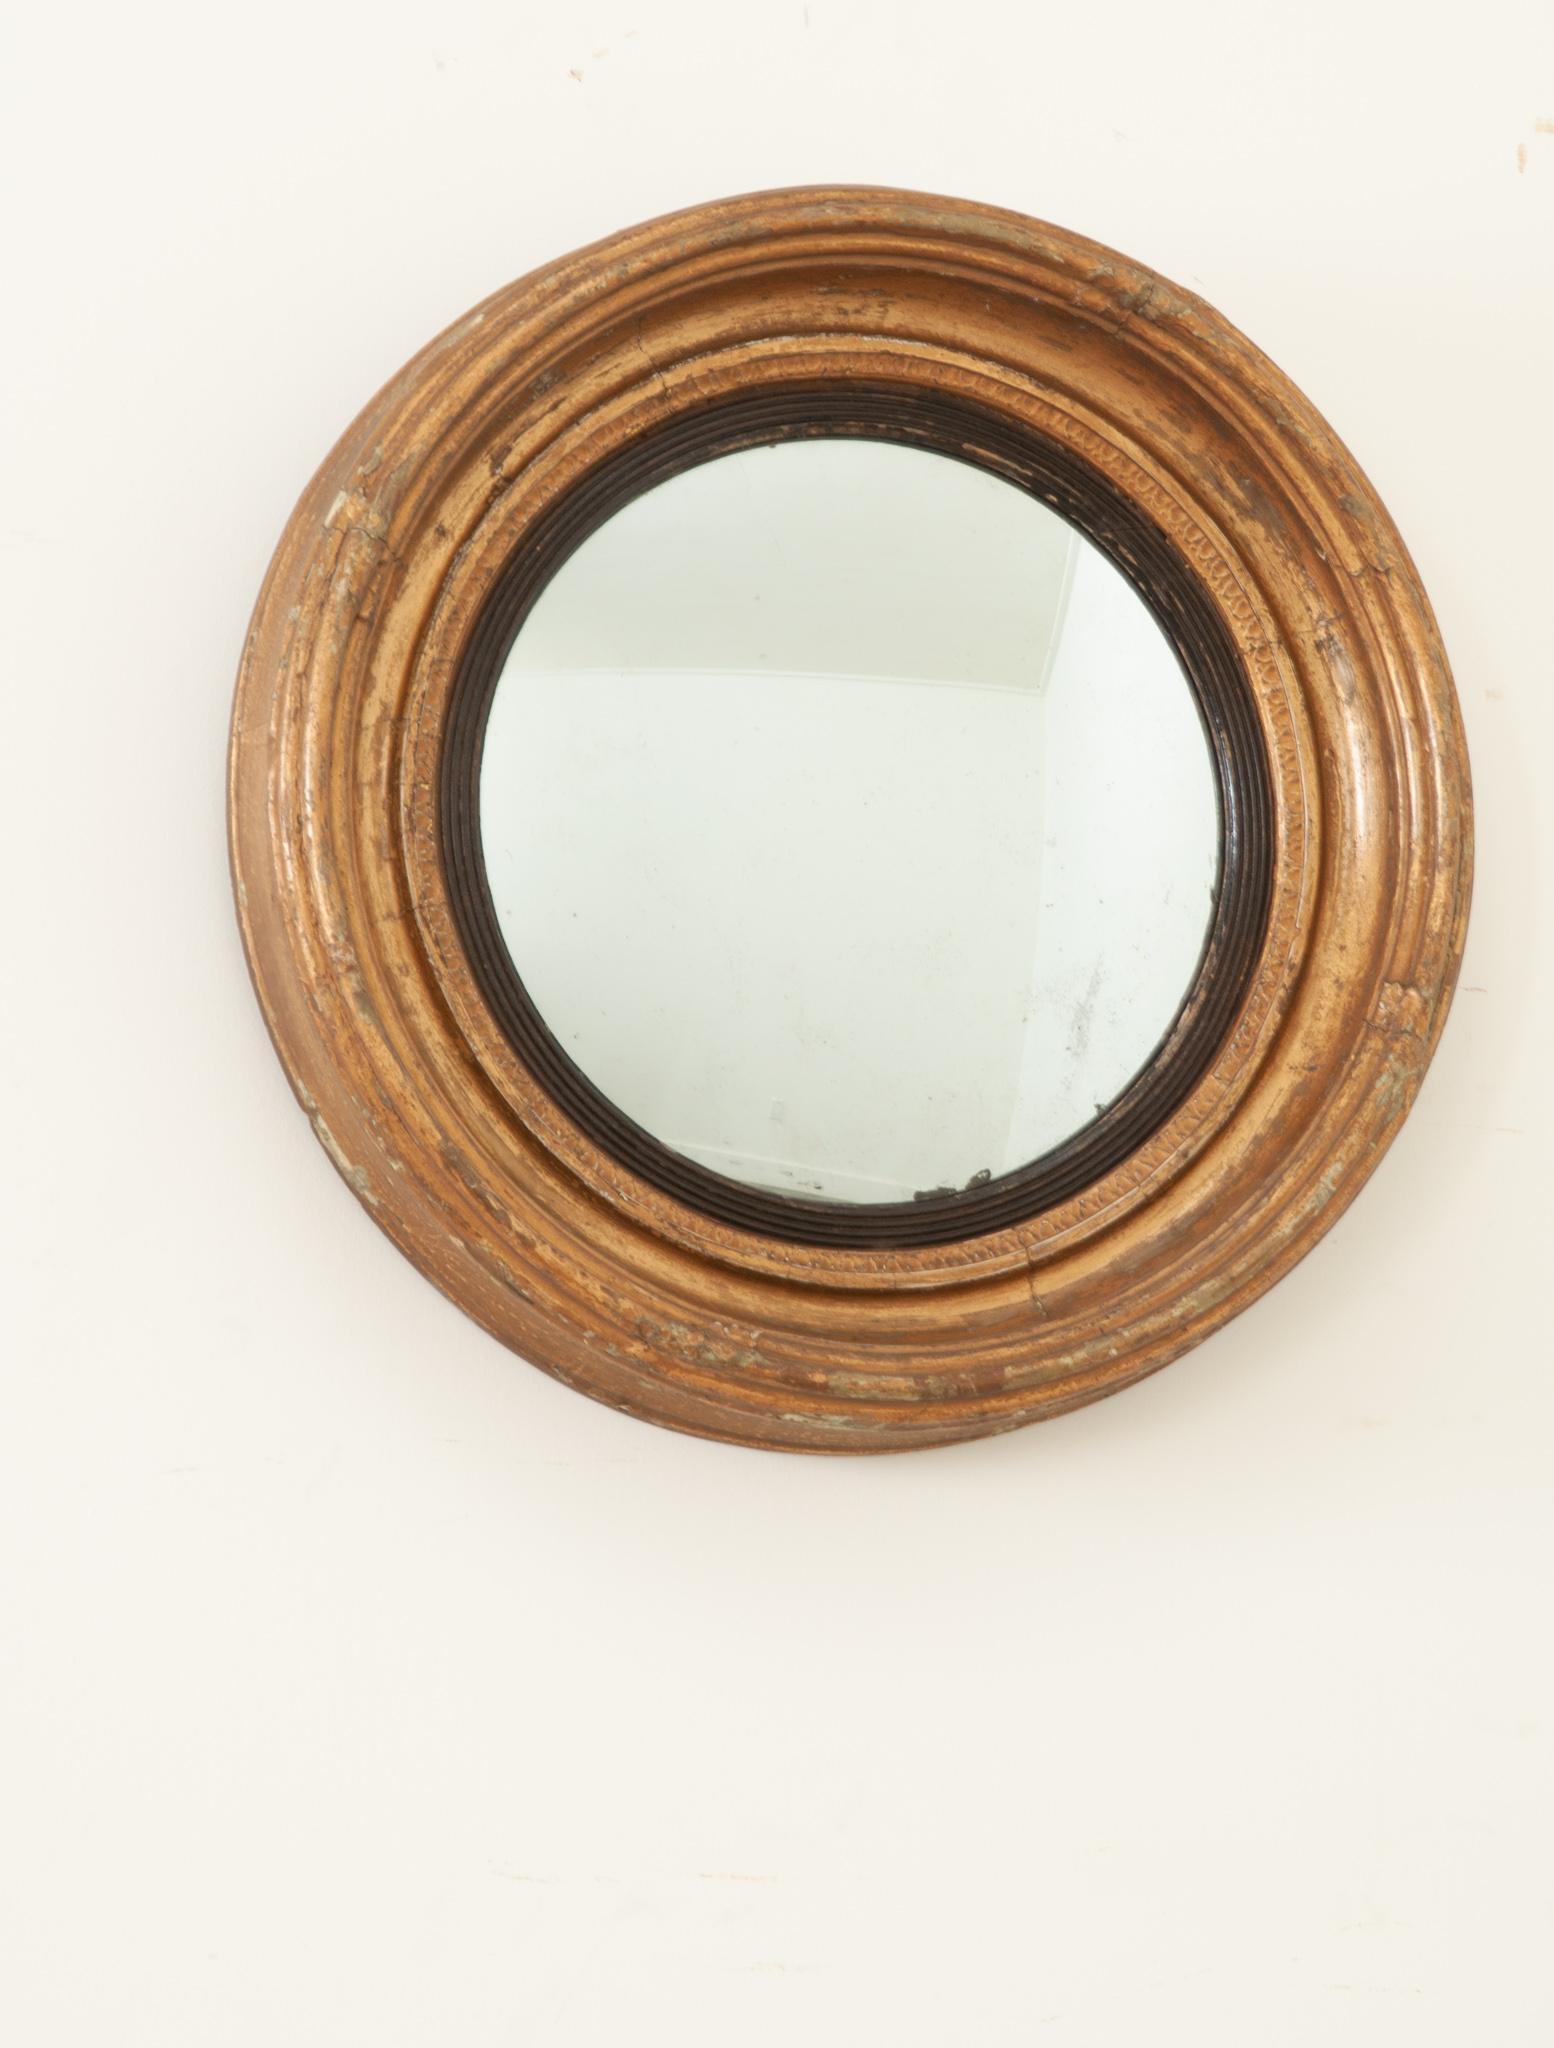 A handsome convex mirror crafted in England during the 1820’s at the end of the Georgian era. The round molded gold gilt frame has a lovely patina and secures the antique mirror plate firmly. The mirror has a slight convex and a clear reflection